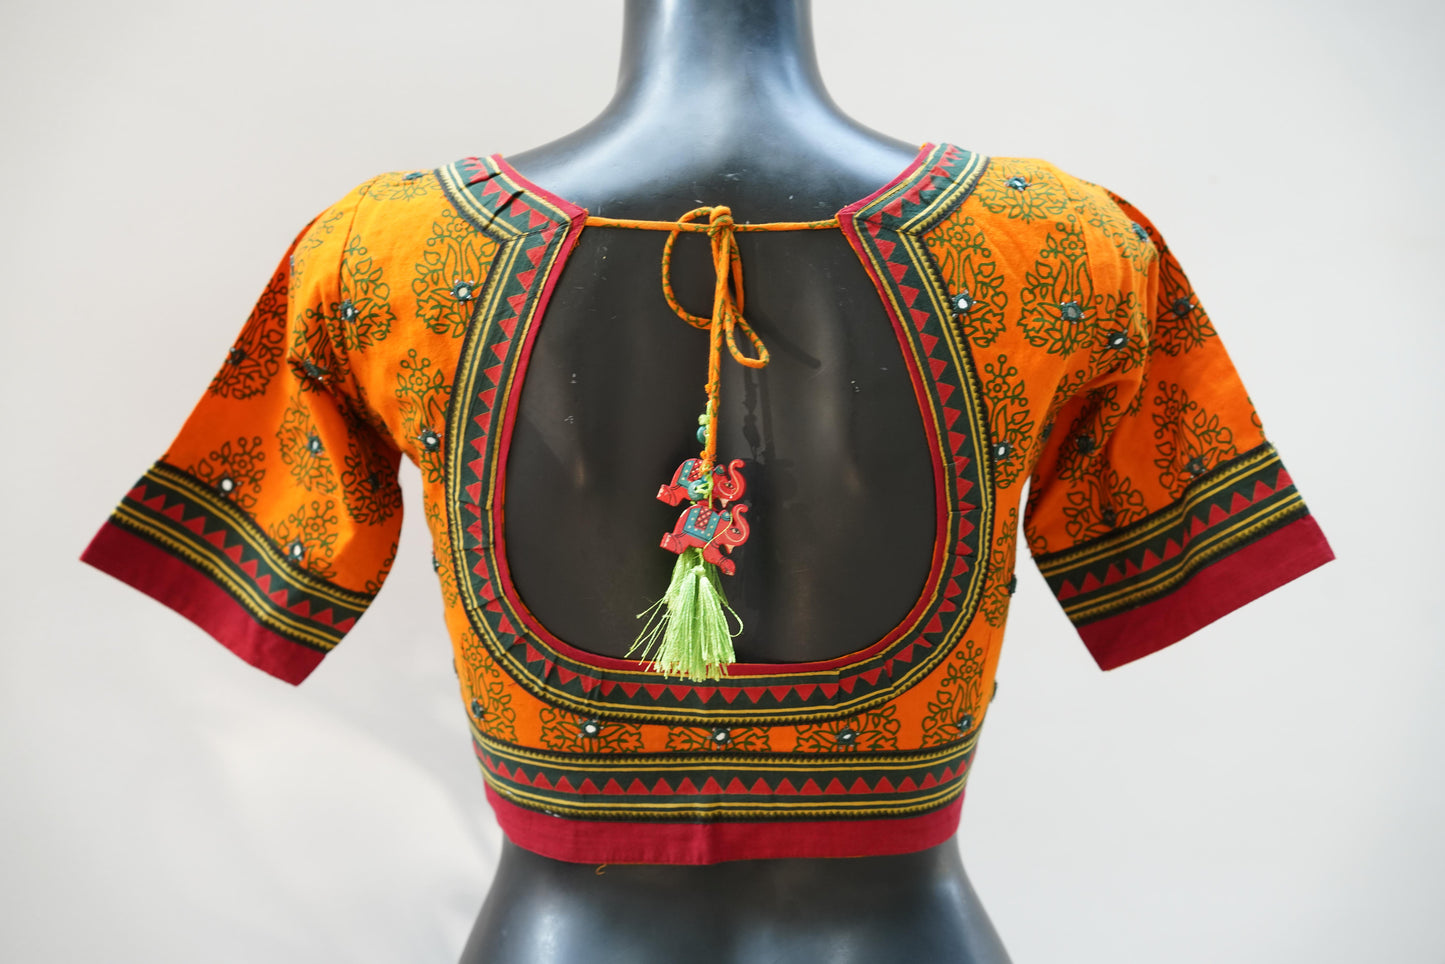 Printed Cotton Blouse with Embroidery